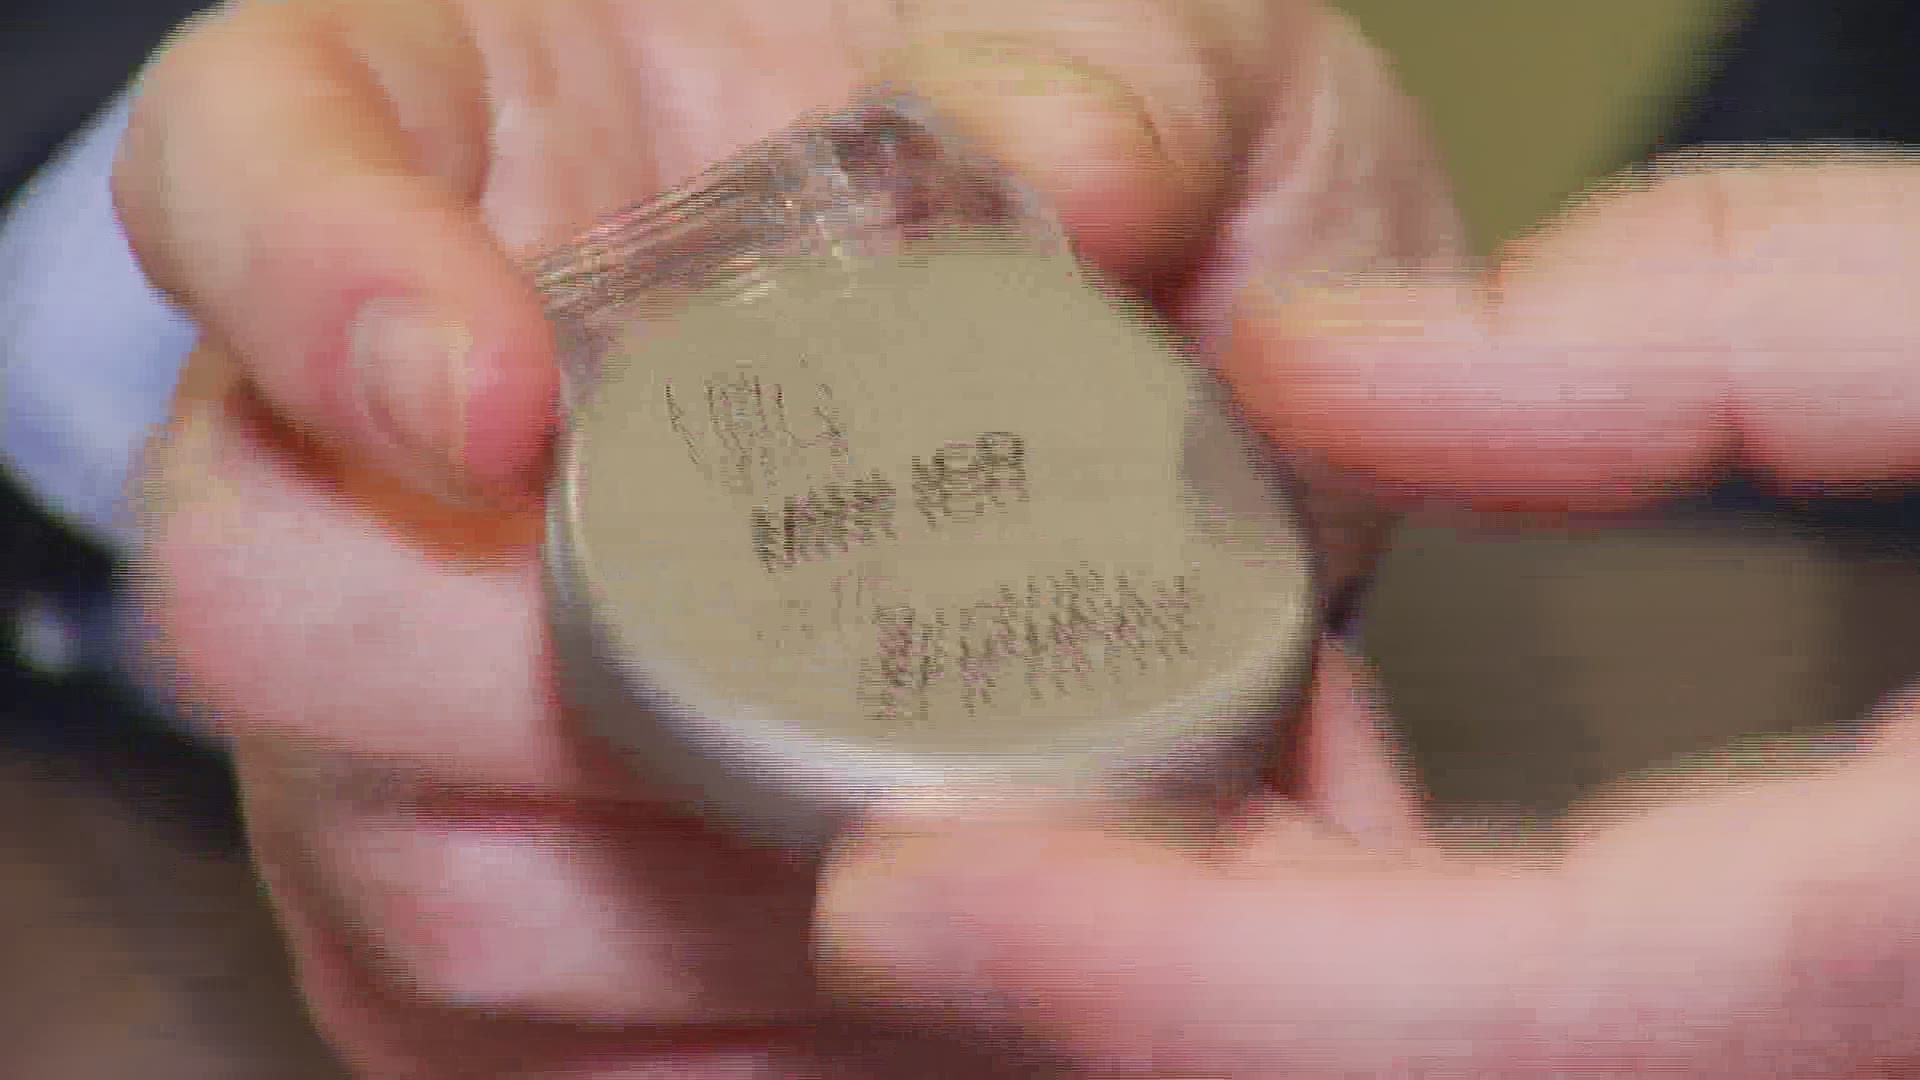 New technology helps better monitor the health of people with Pacemakers